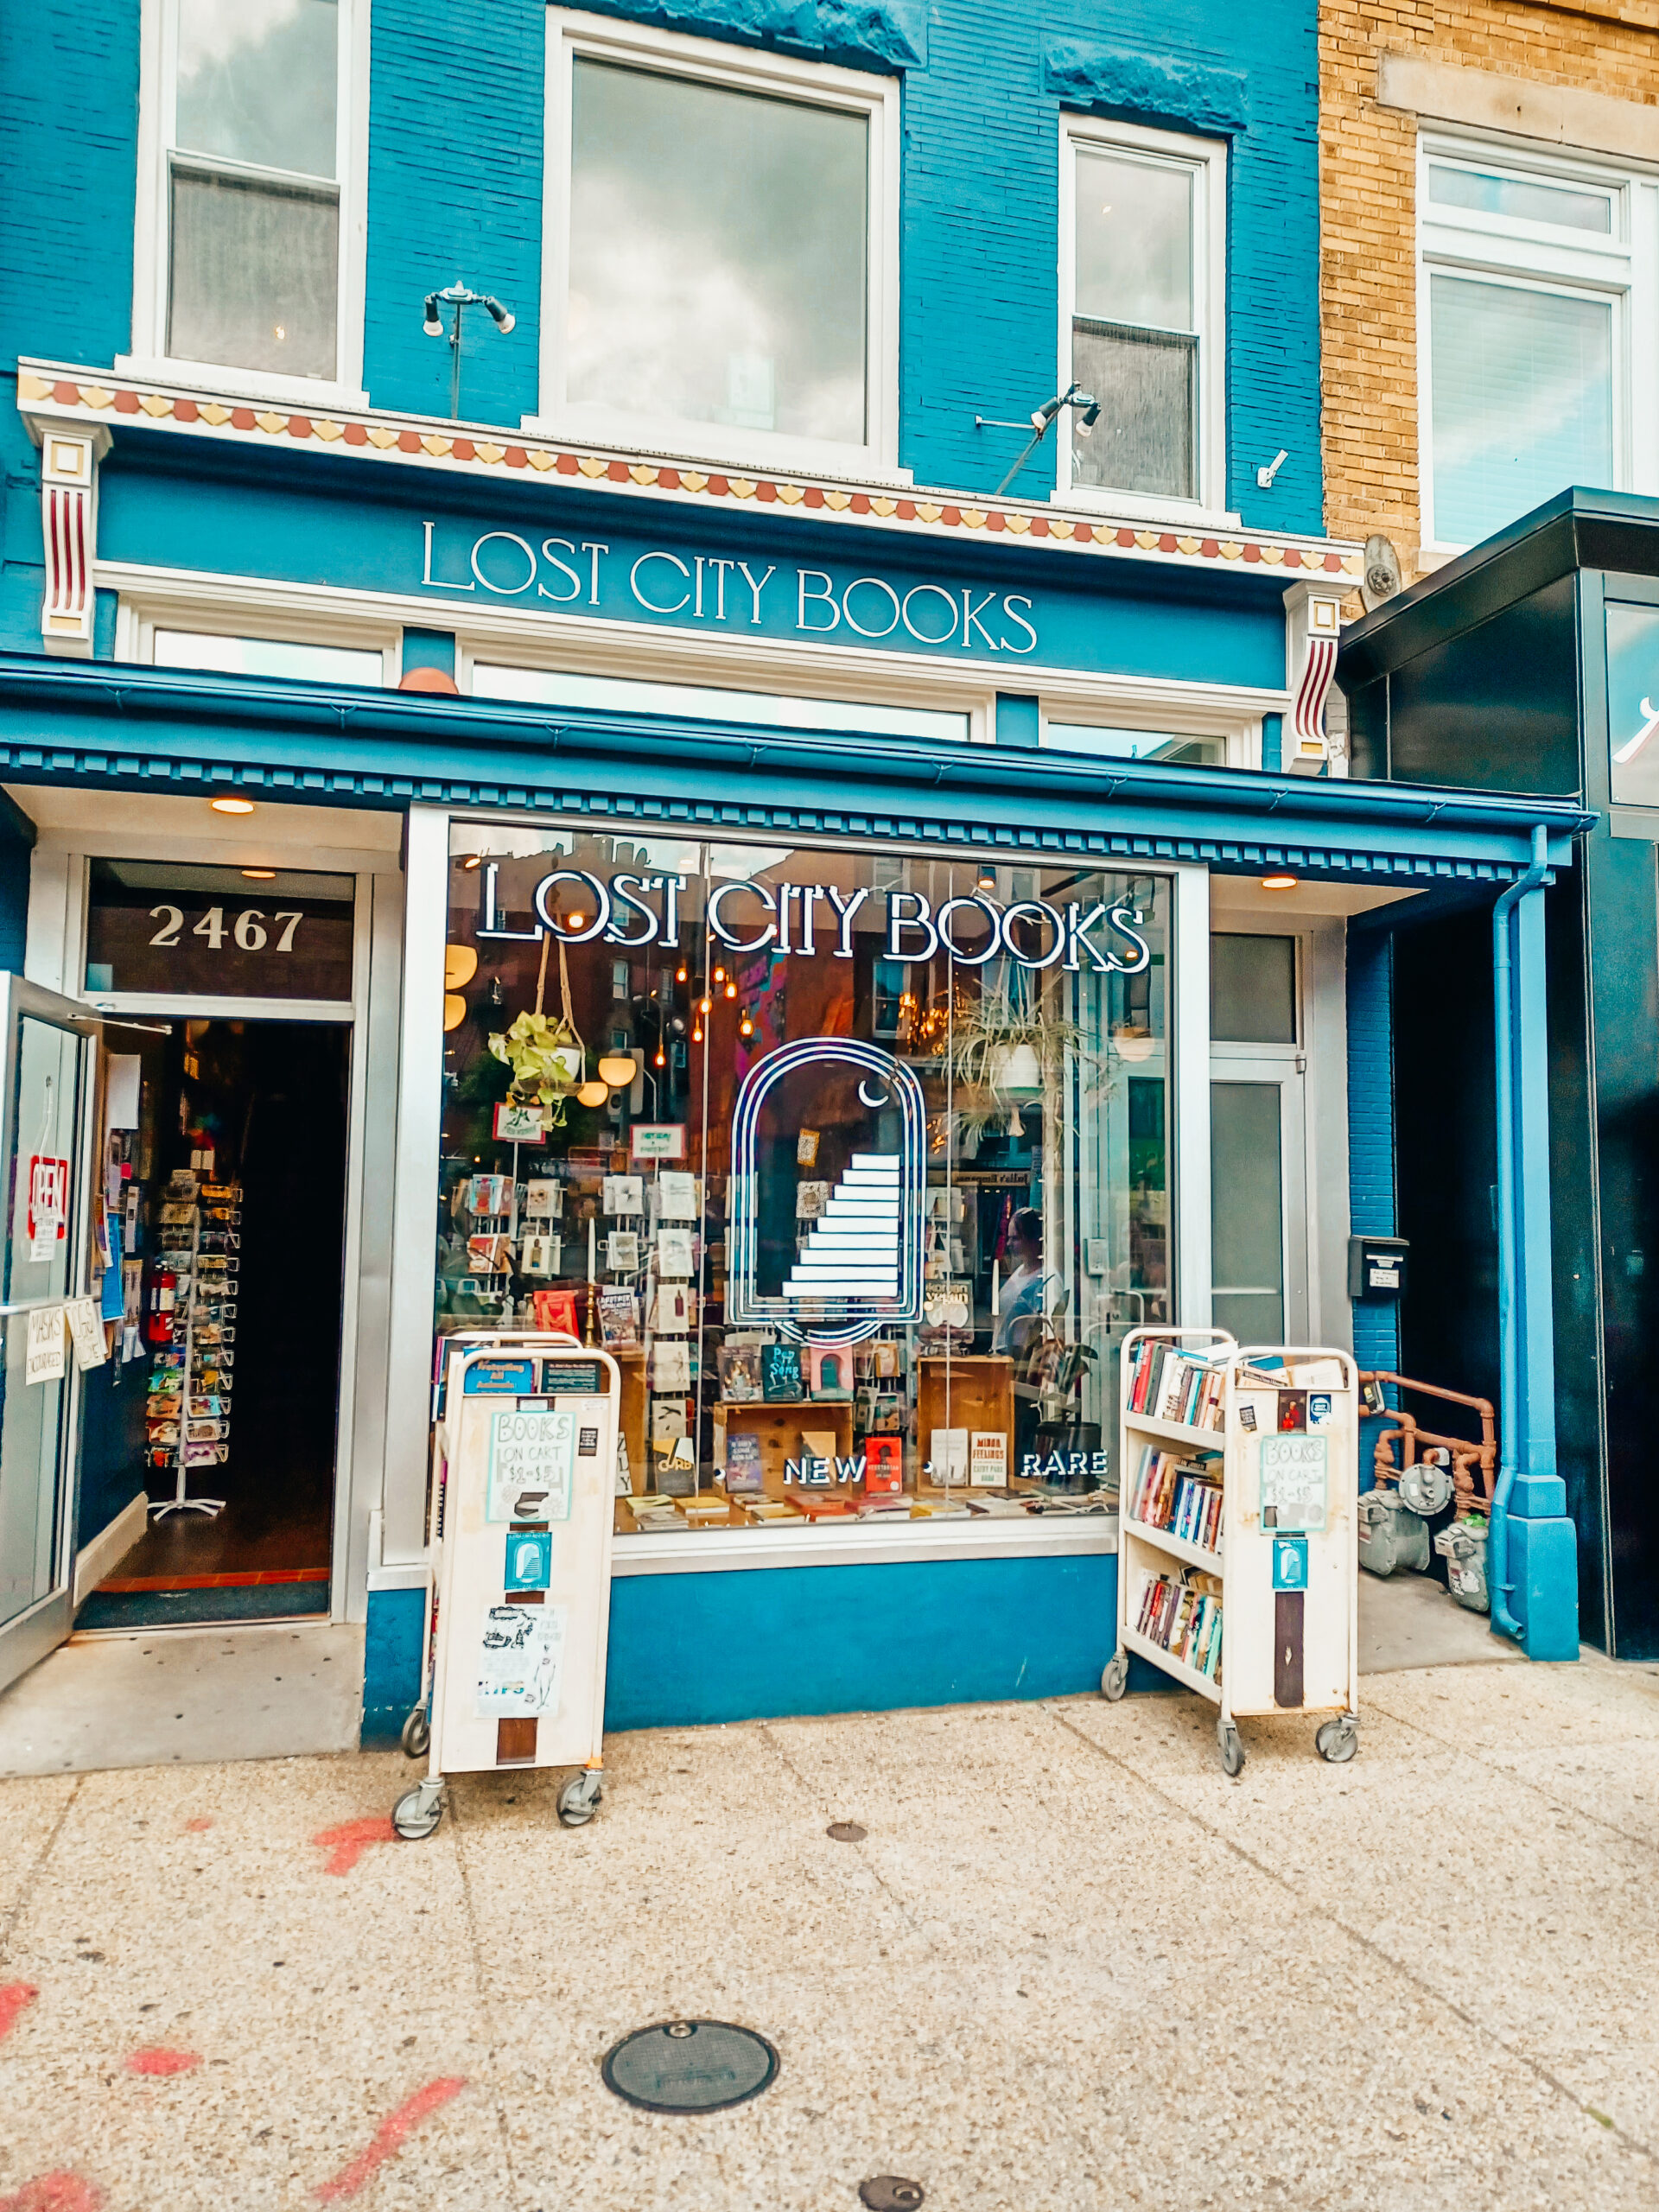 Exterior of Lost City Books bookstore in Adams Morgan. The building is blue and white with shelves of books on the outside.